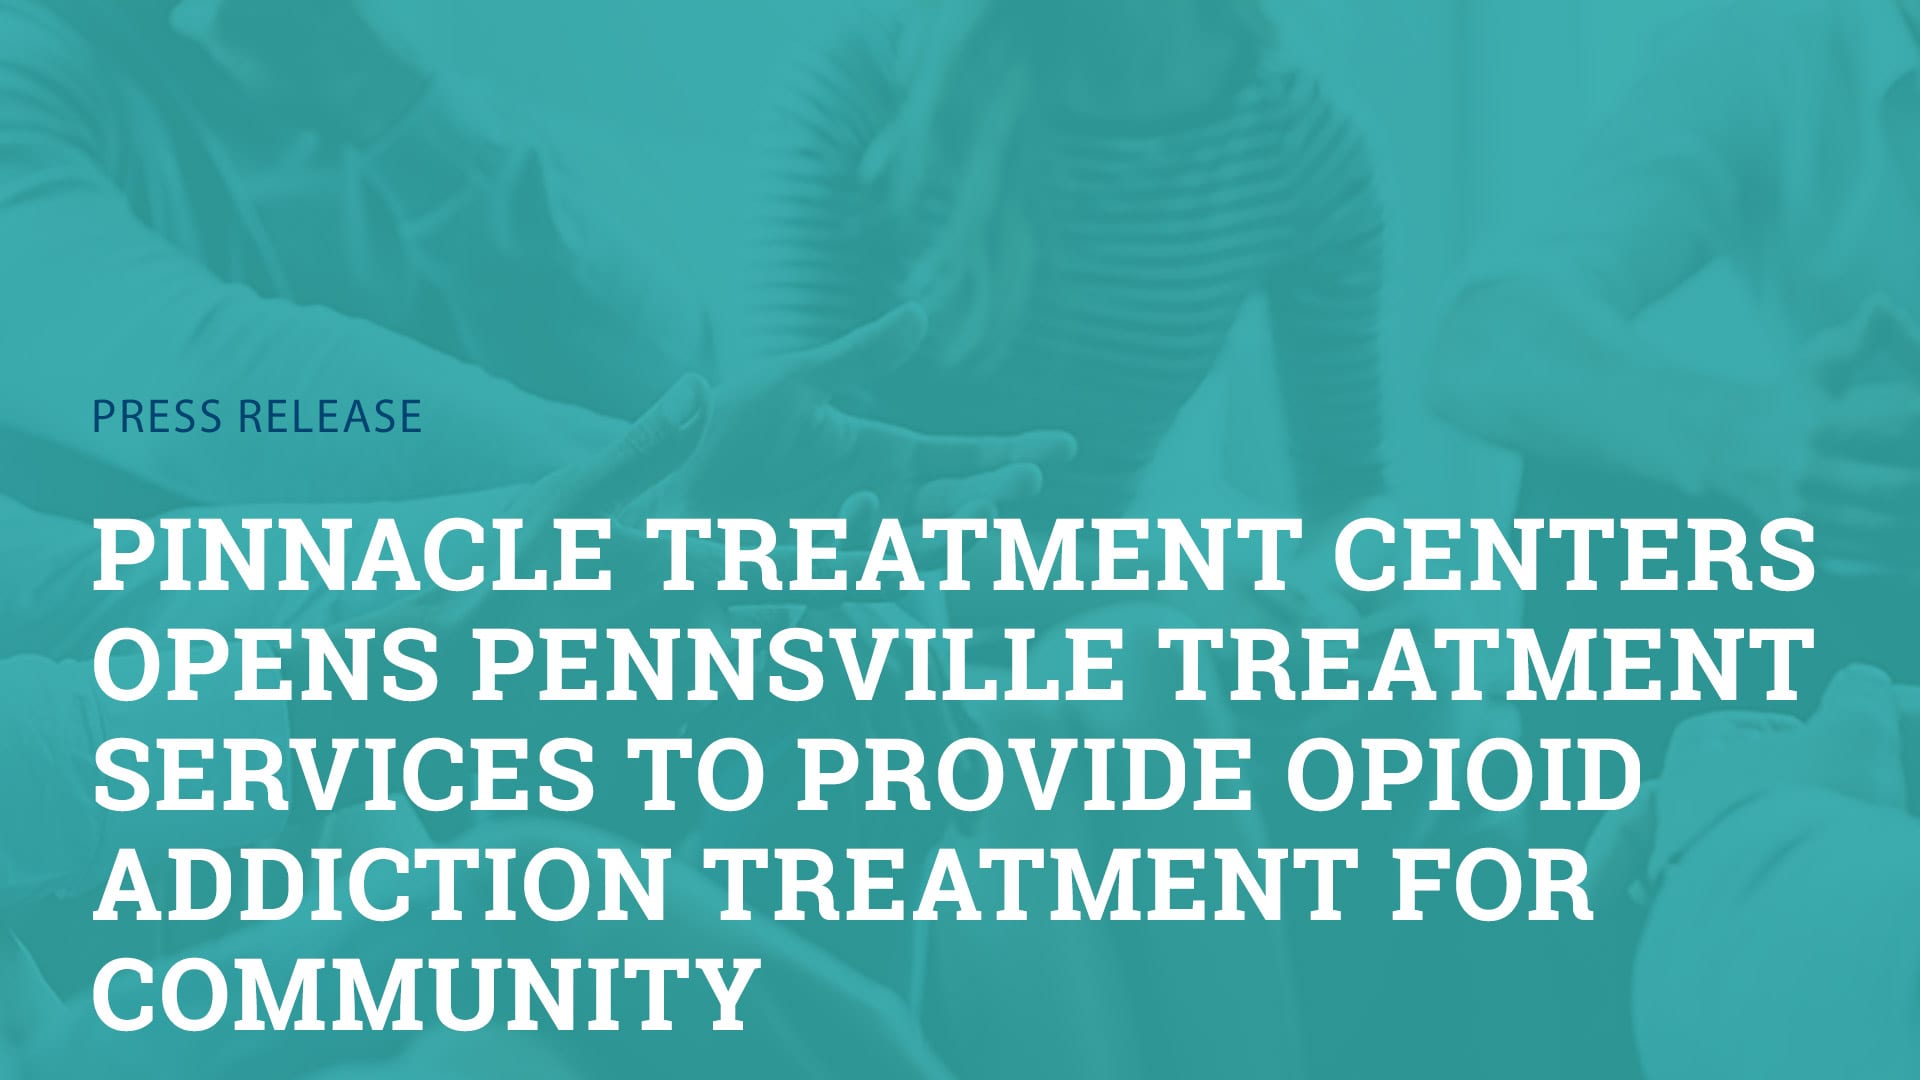 Pinnacle Treatment Centers Opens Pennsville Treatment Services to provide opioid addiction treatment for community